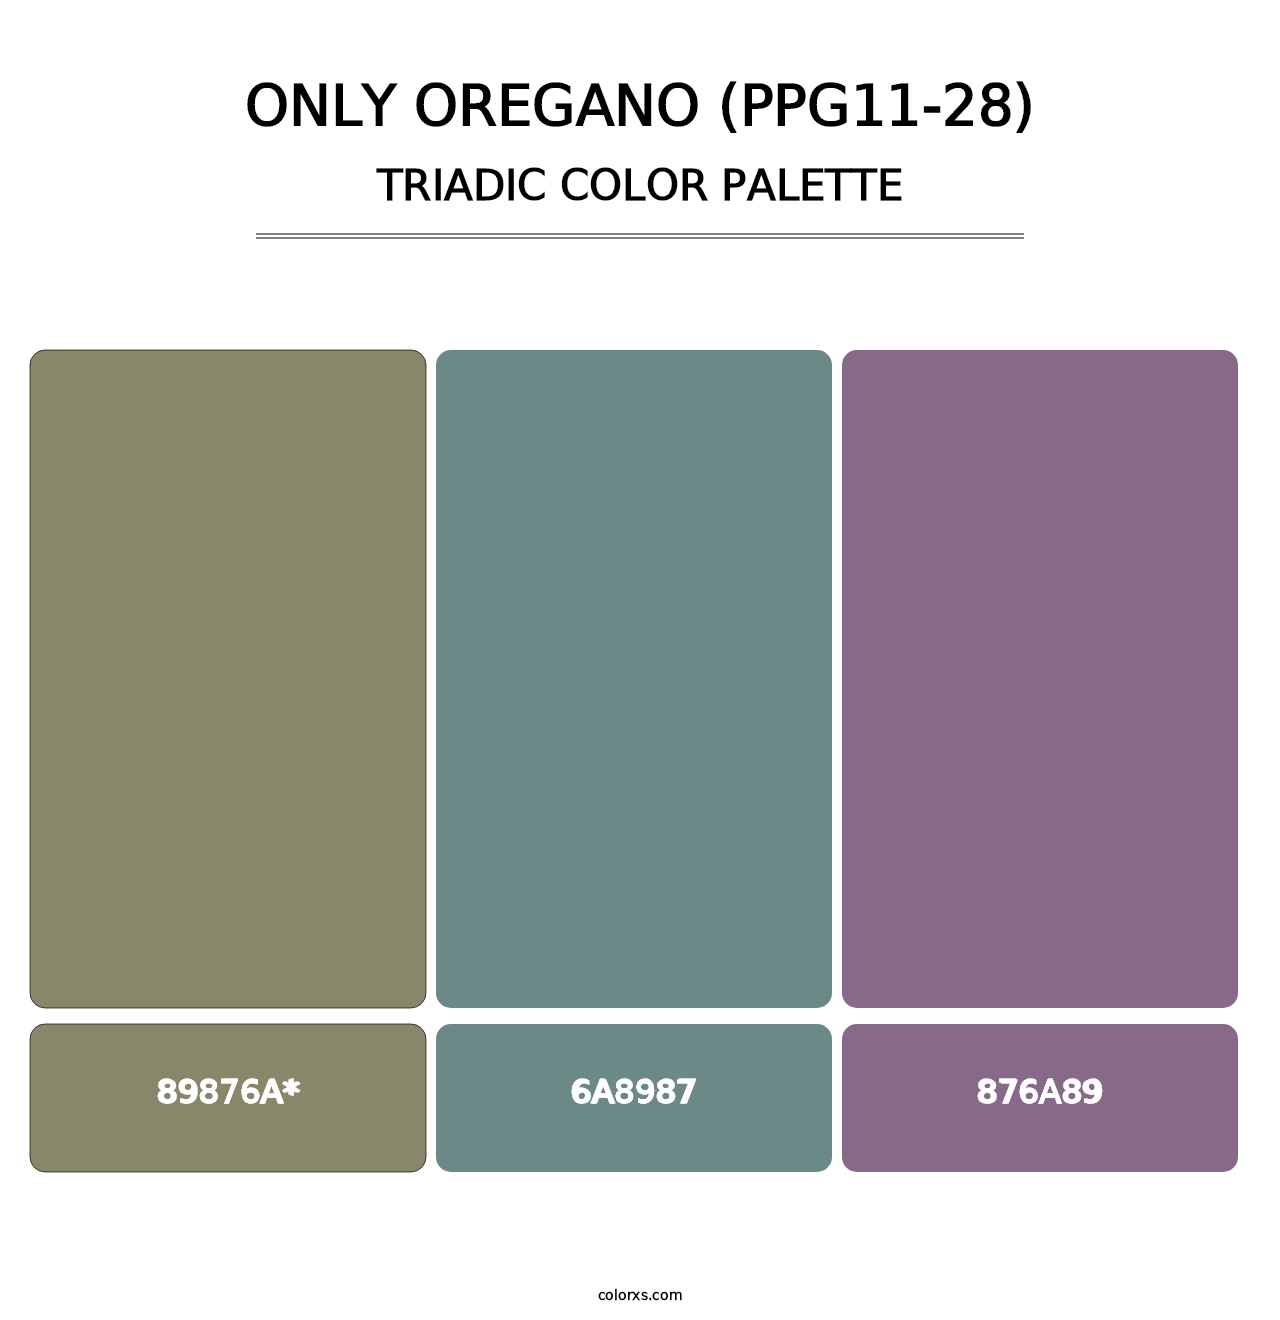 Only Oregano (PPG11-28) - Triadic Color Palette